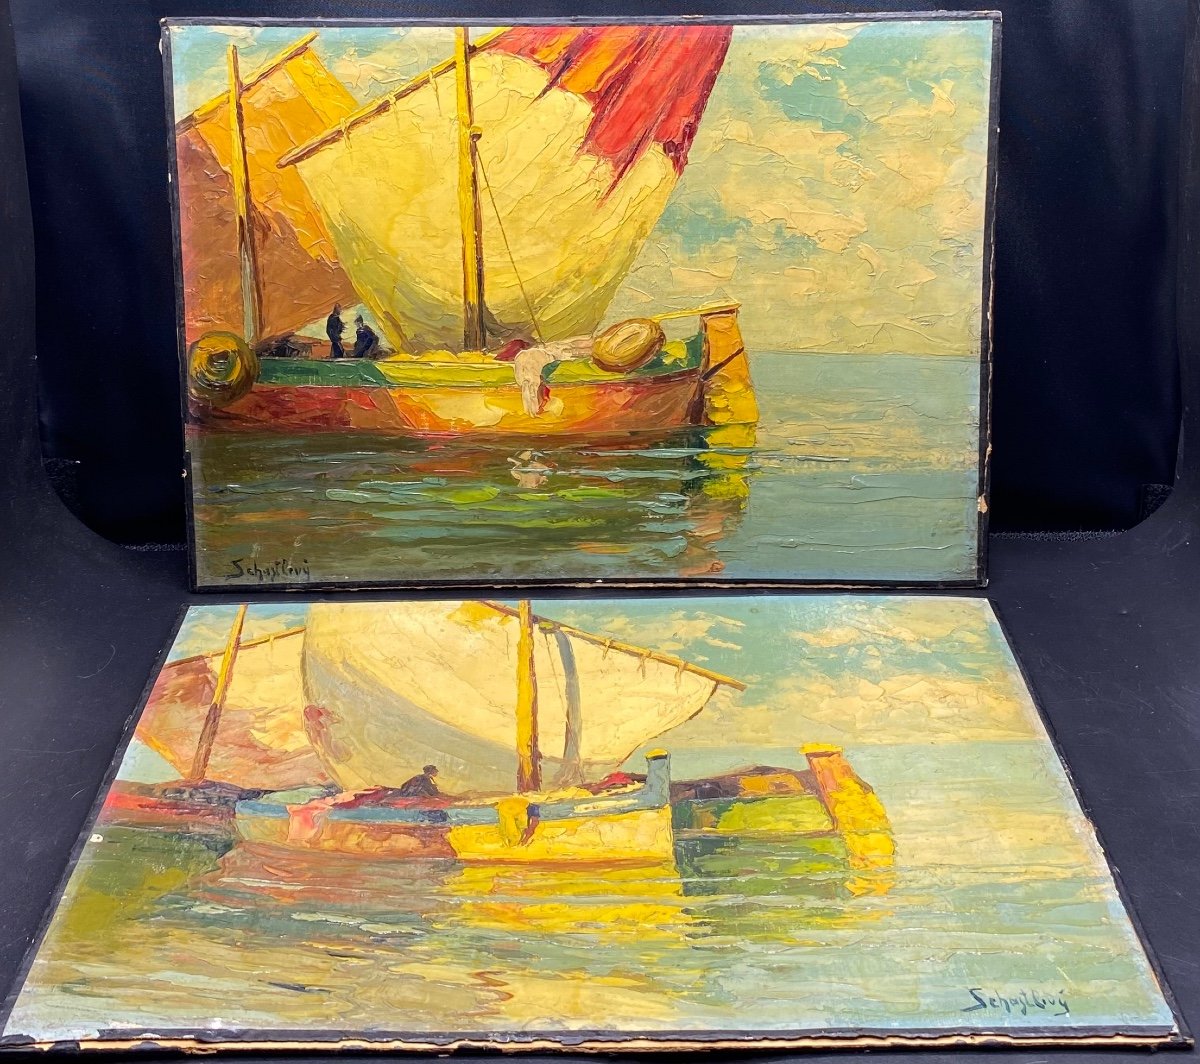 Pair Of Oil On Canvas Fixed On Cardboard From The 1900s By Schastlivy